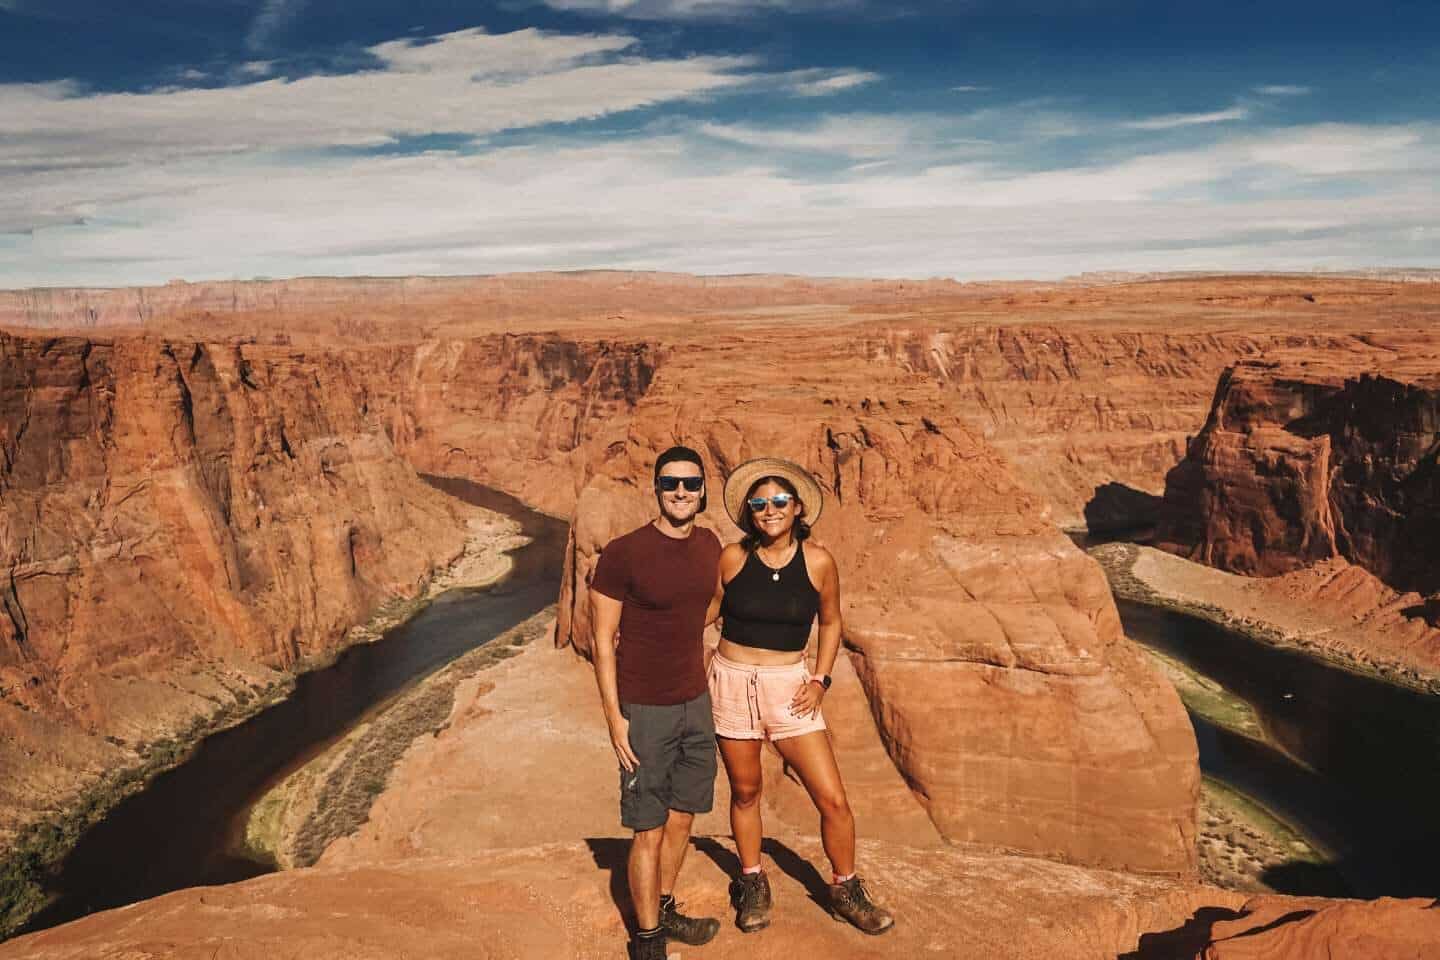 Tom and Anna on horseshoe bend east rim of the Grand Canyon